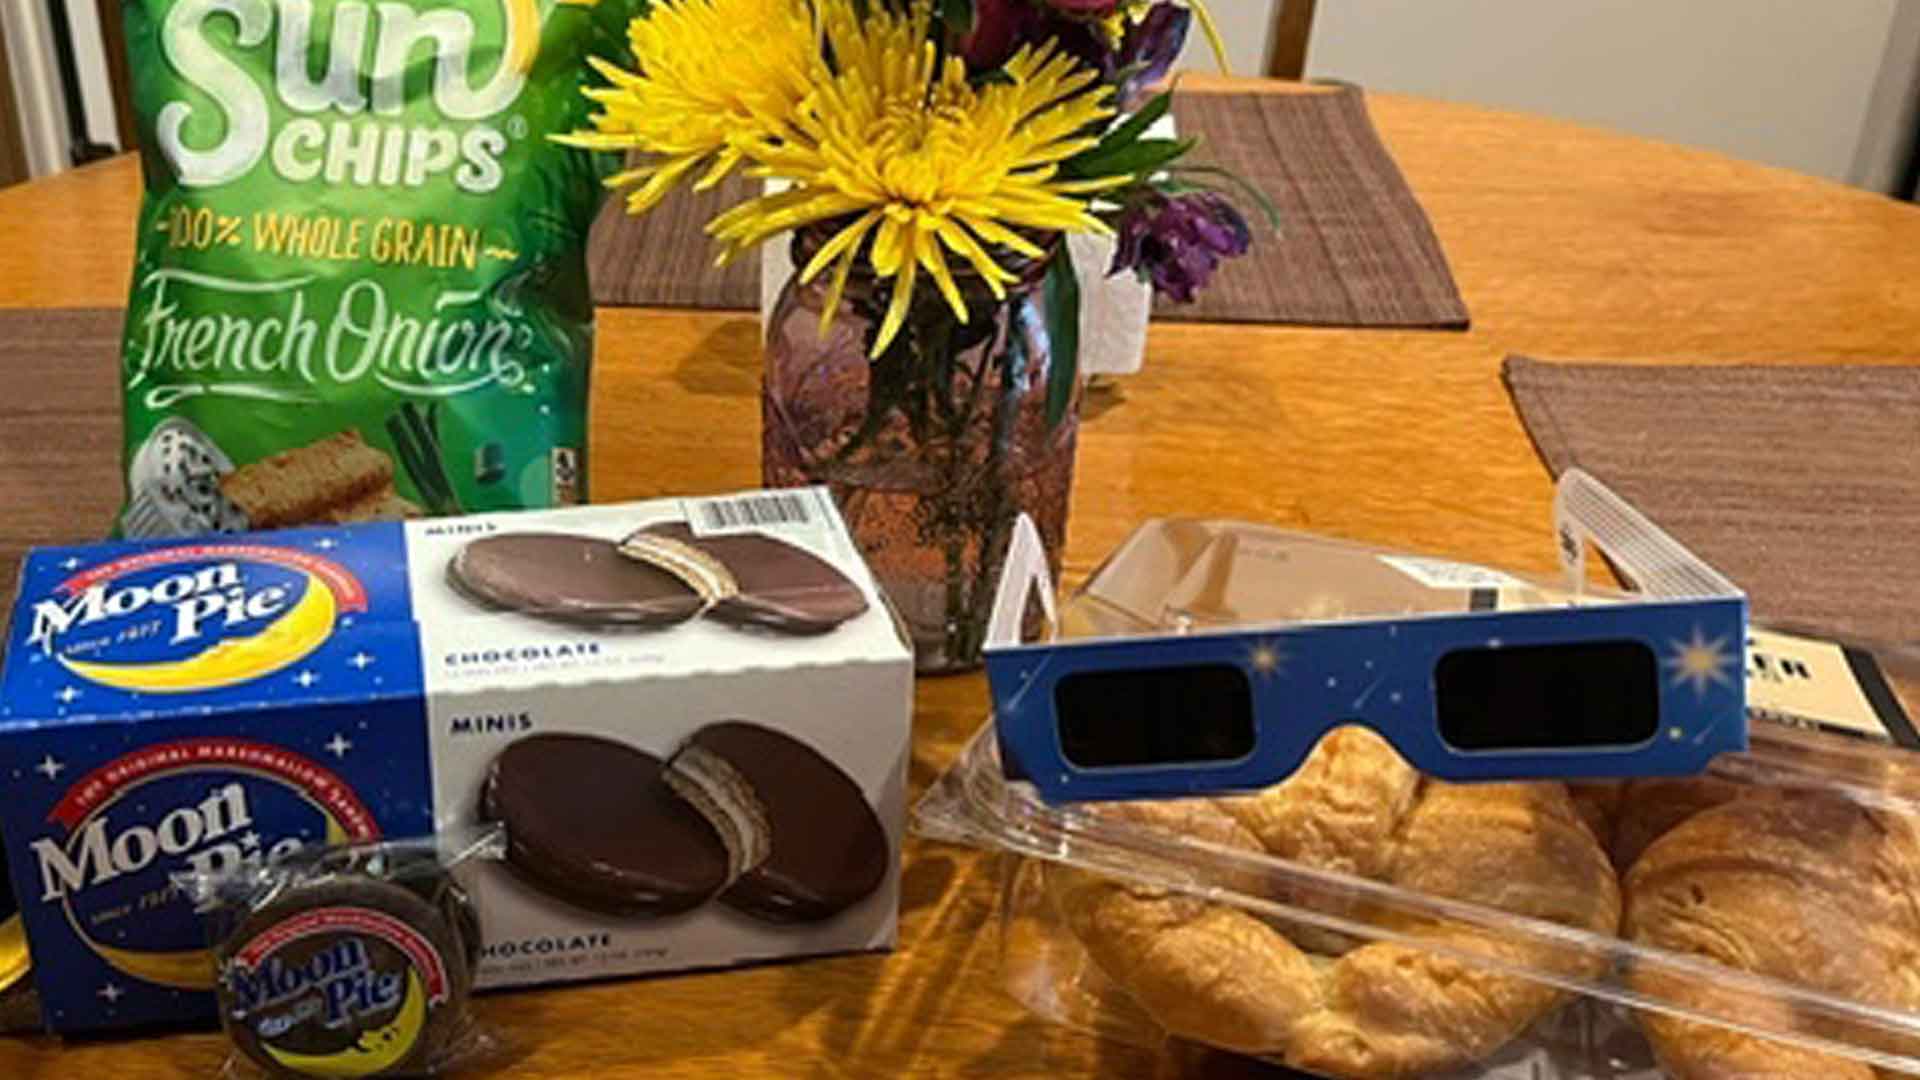 It's not too late to throw together an eclipse party, here are some
ideas